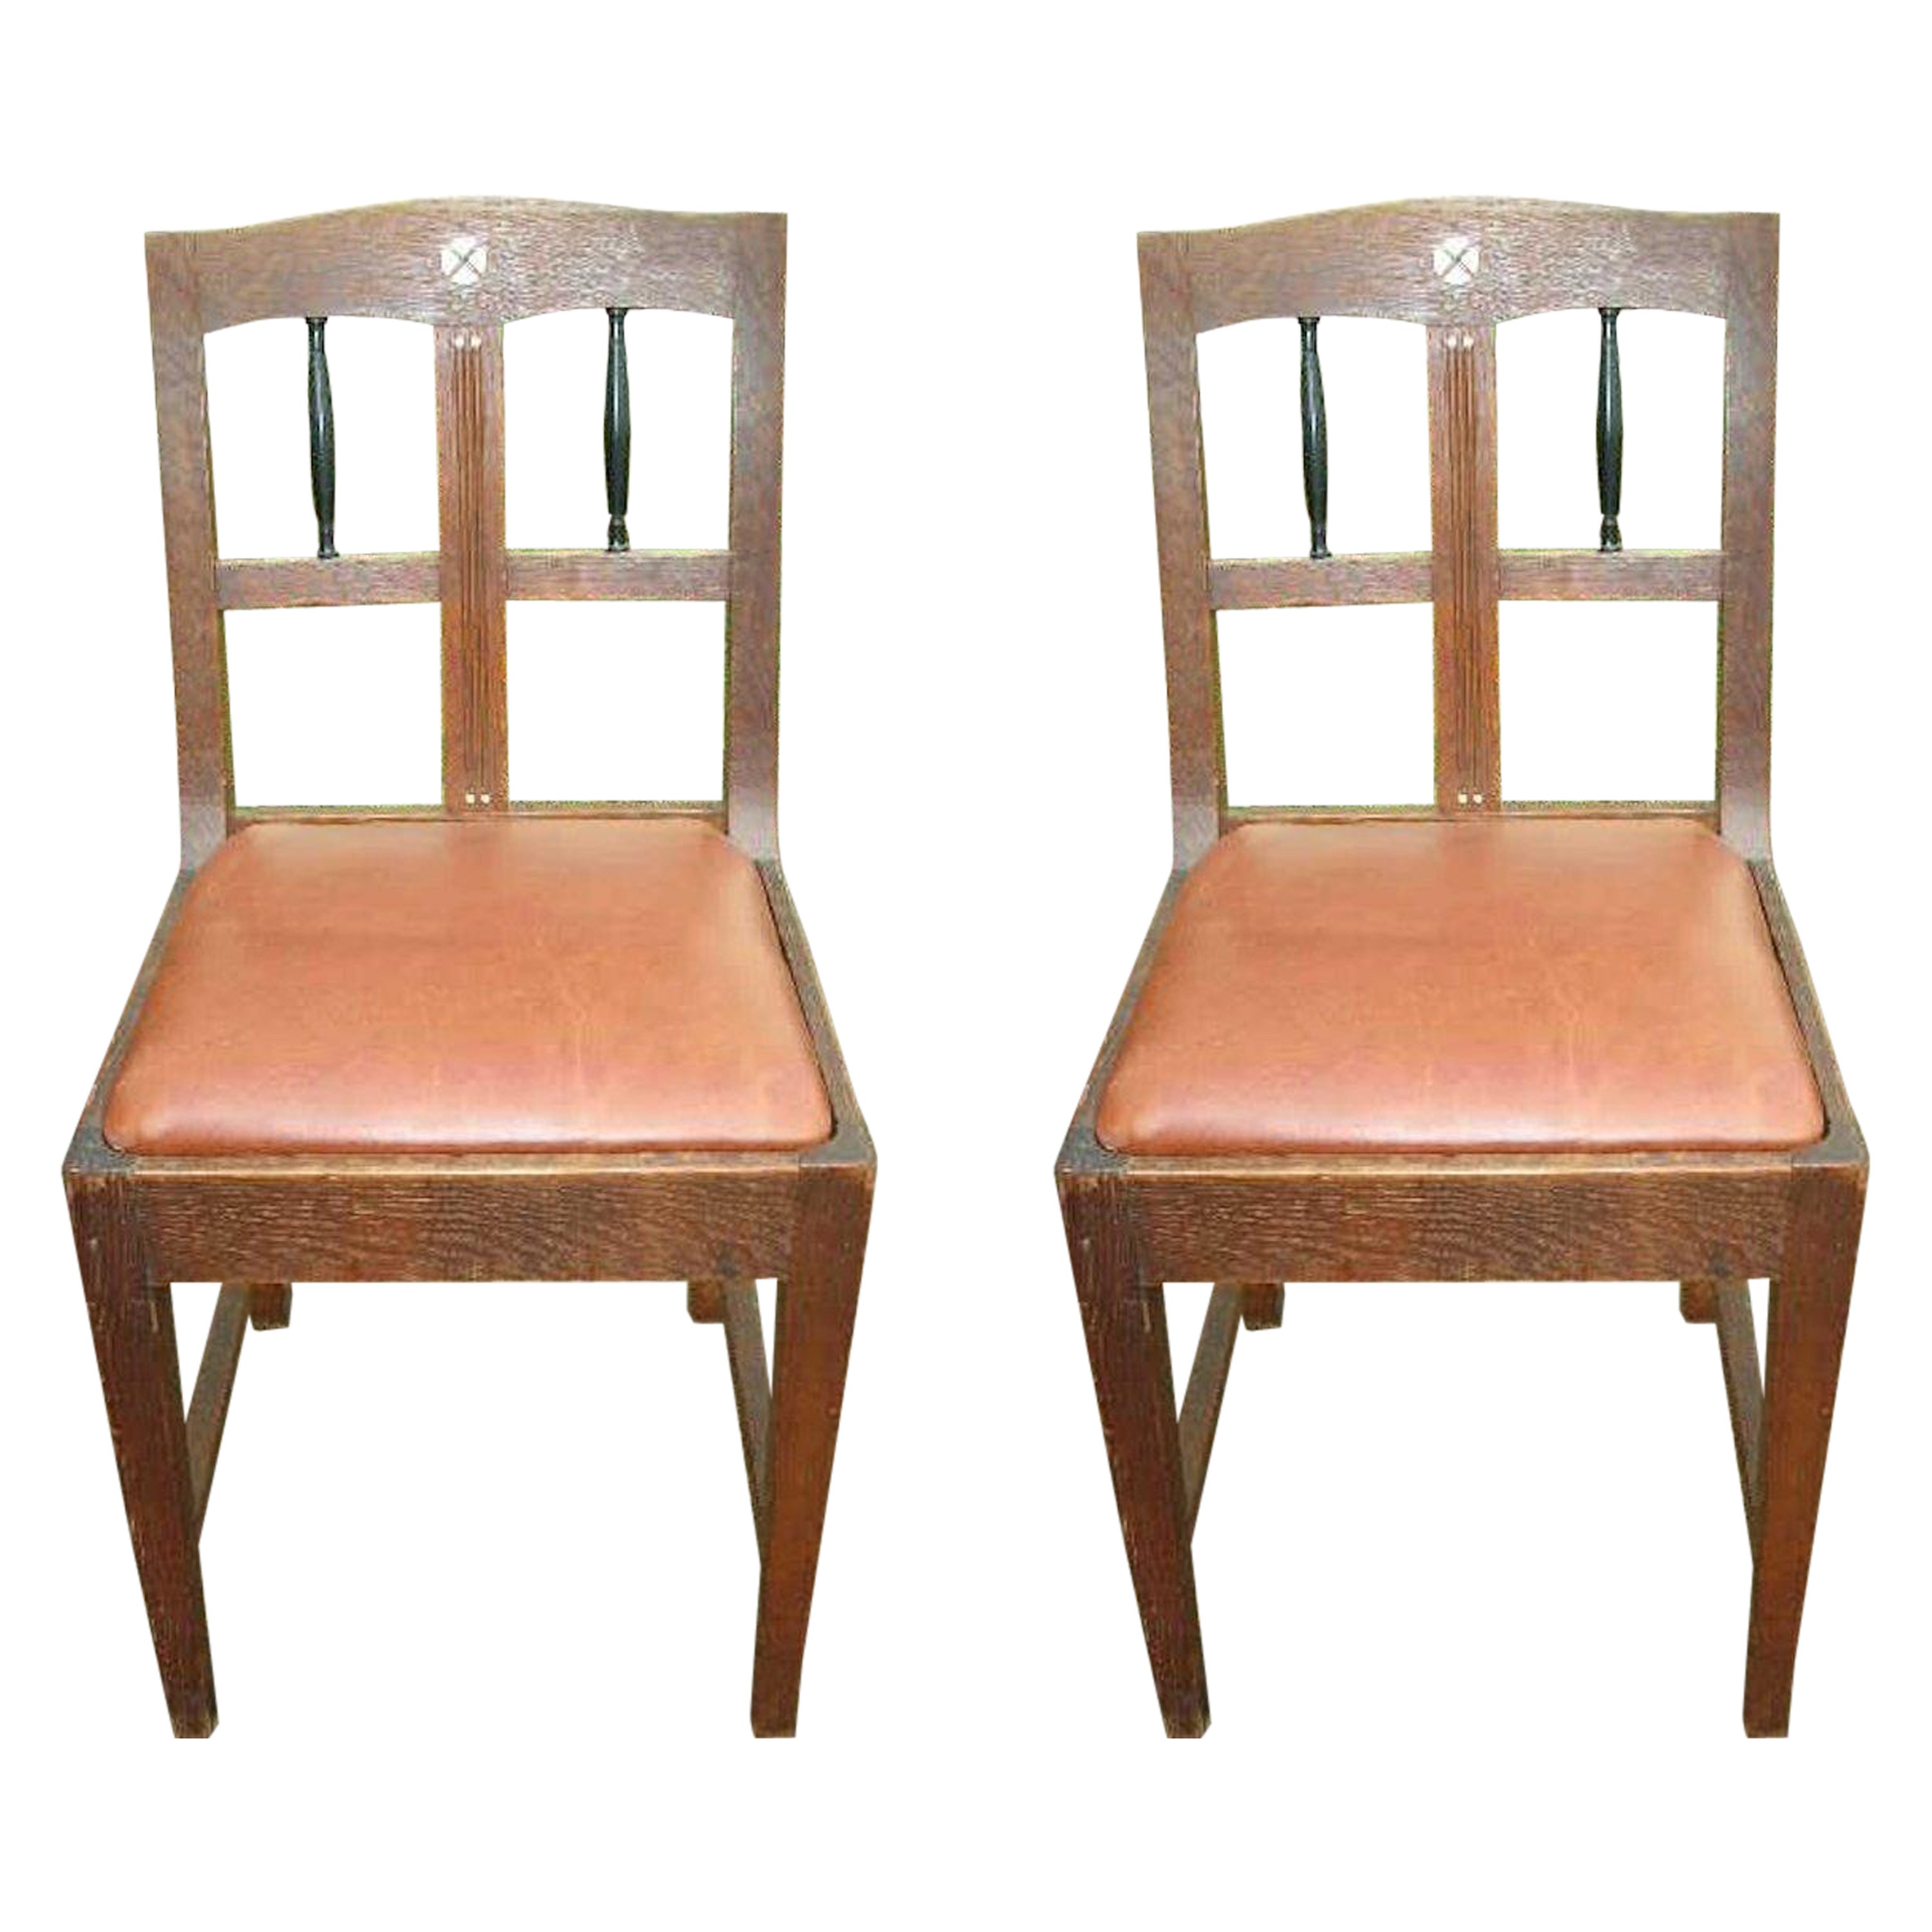 Pair of Secessionist Style Oak Side Chairs with Ebonized Spindles For Sale